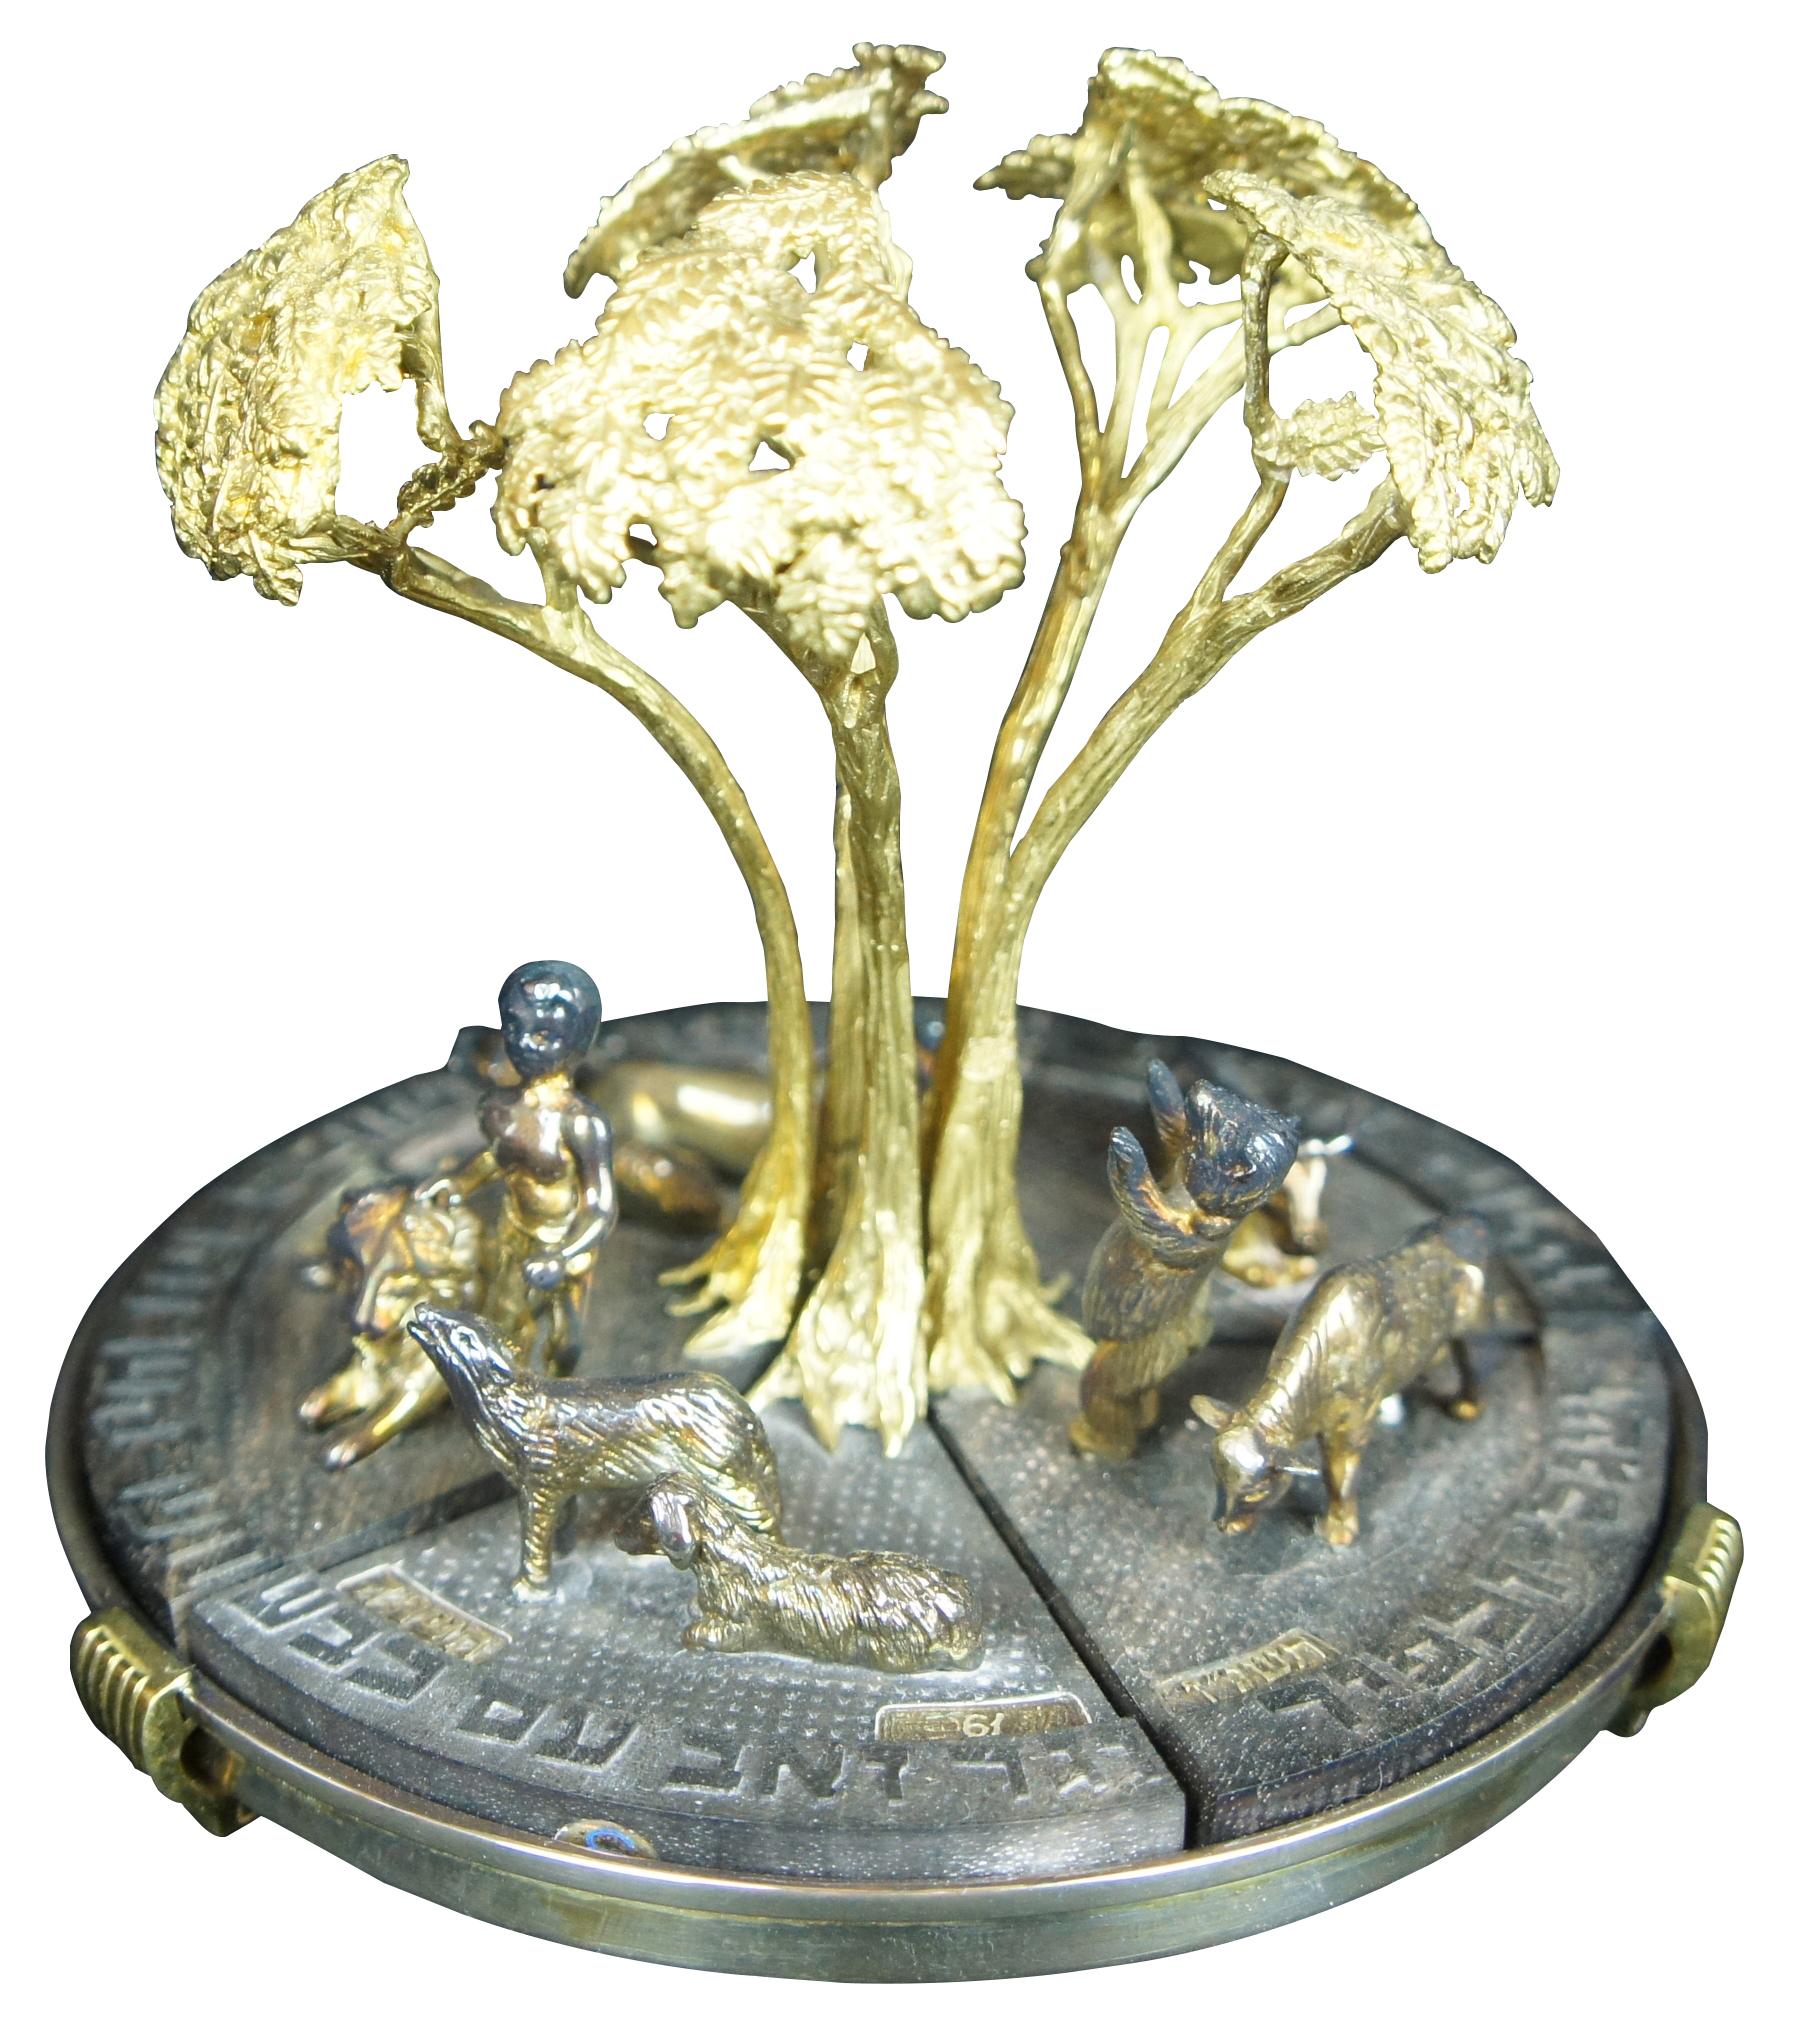 Vintage Dudik Swed Masters Tree of Life statue or figurine.  Made in Israel consisting of silver, brass and wood featuring five pieces that sit in a dish in puzzle like form.  Features a man, a lion, a bear, oxen, cow, sheep, lamb, wolf and lions